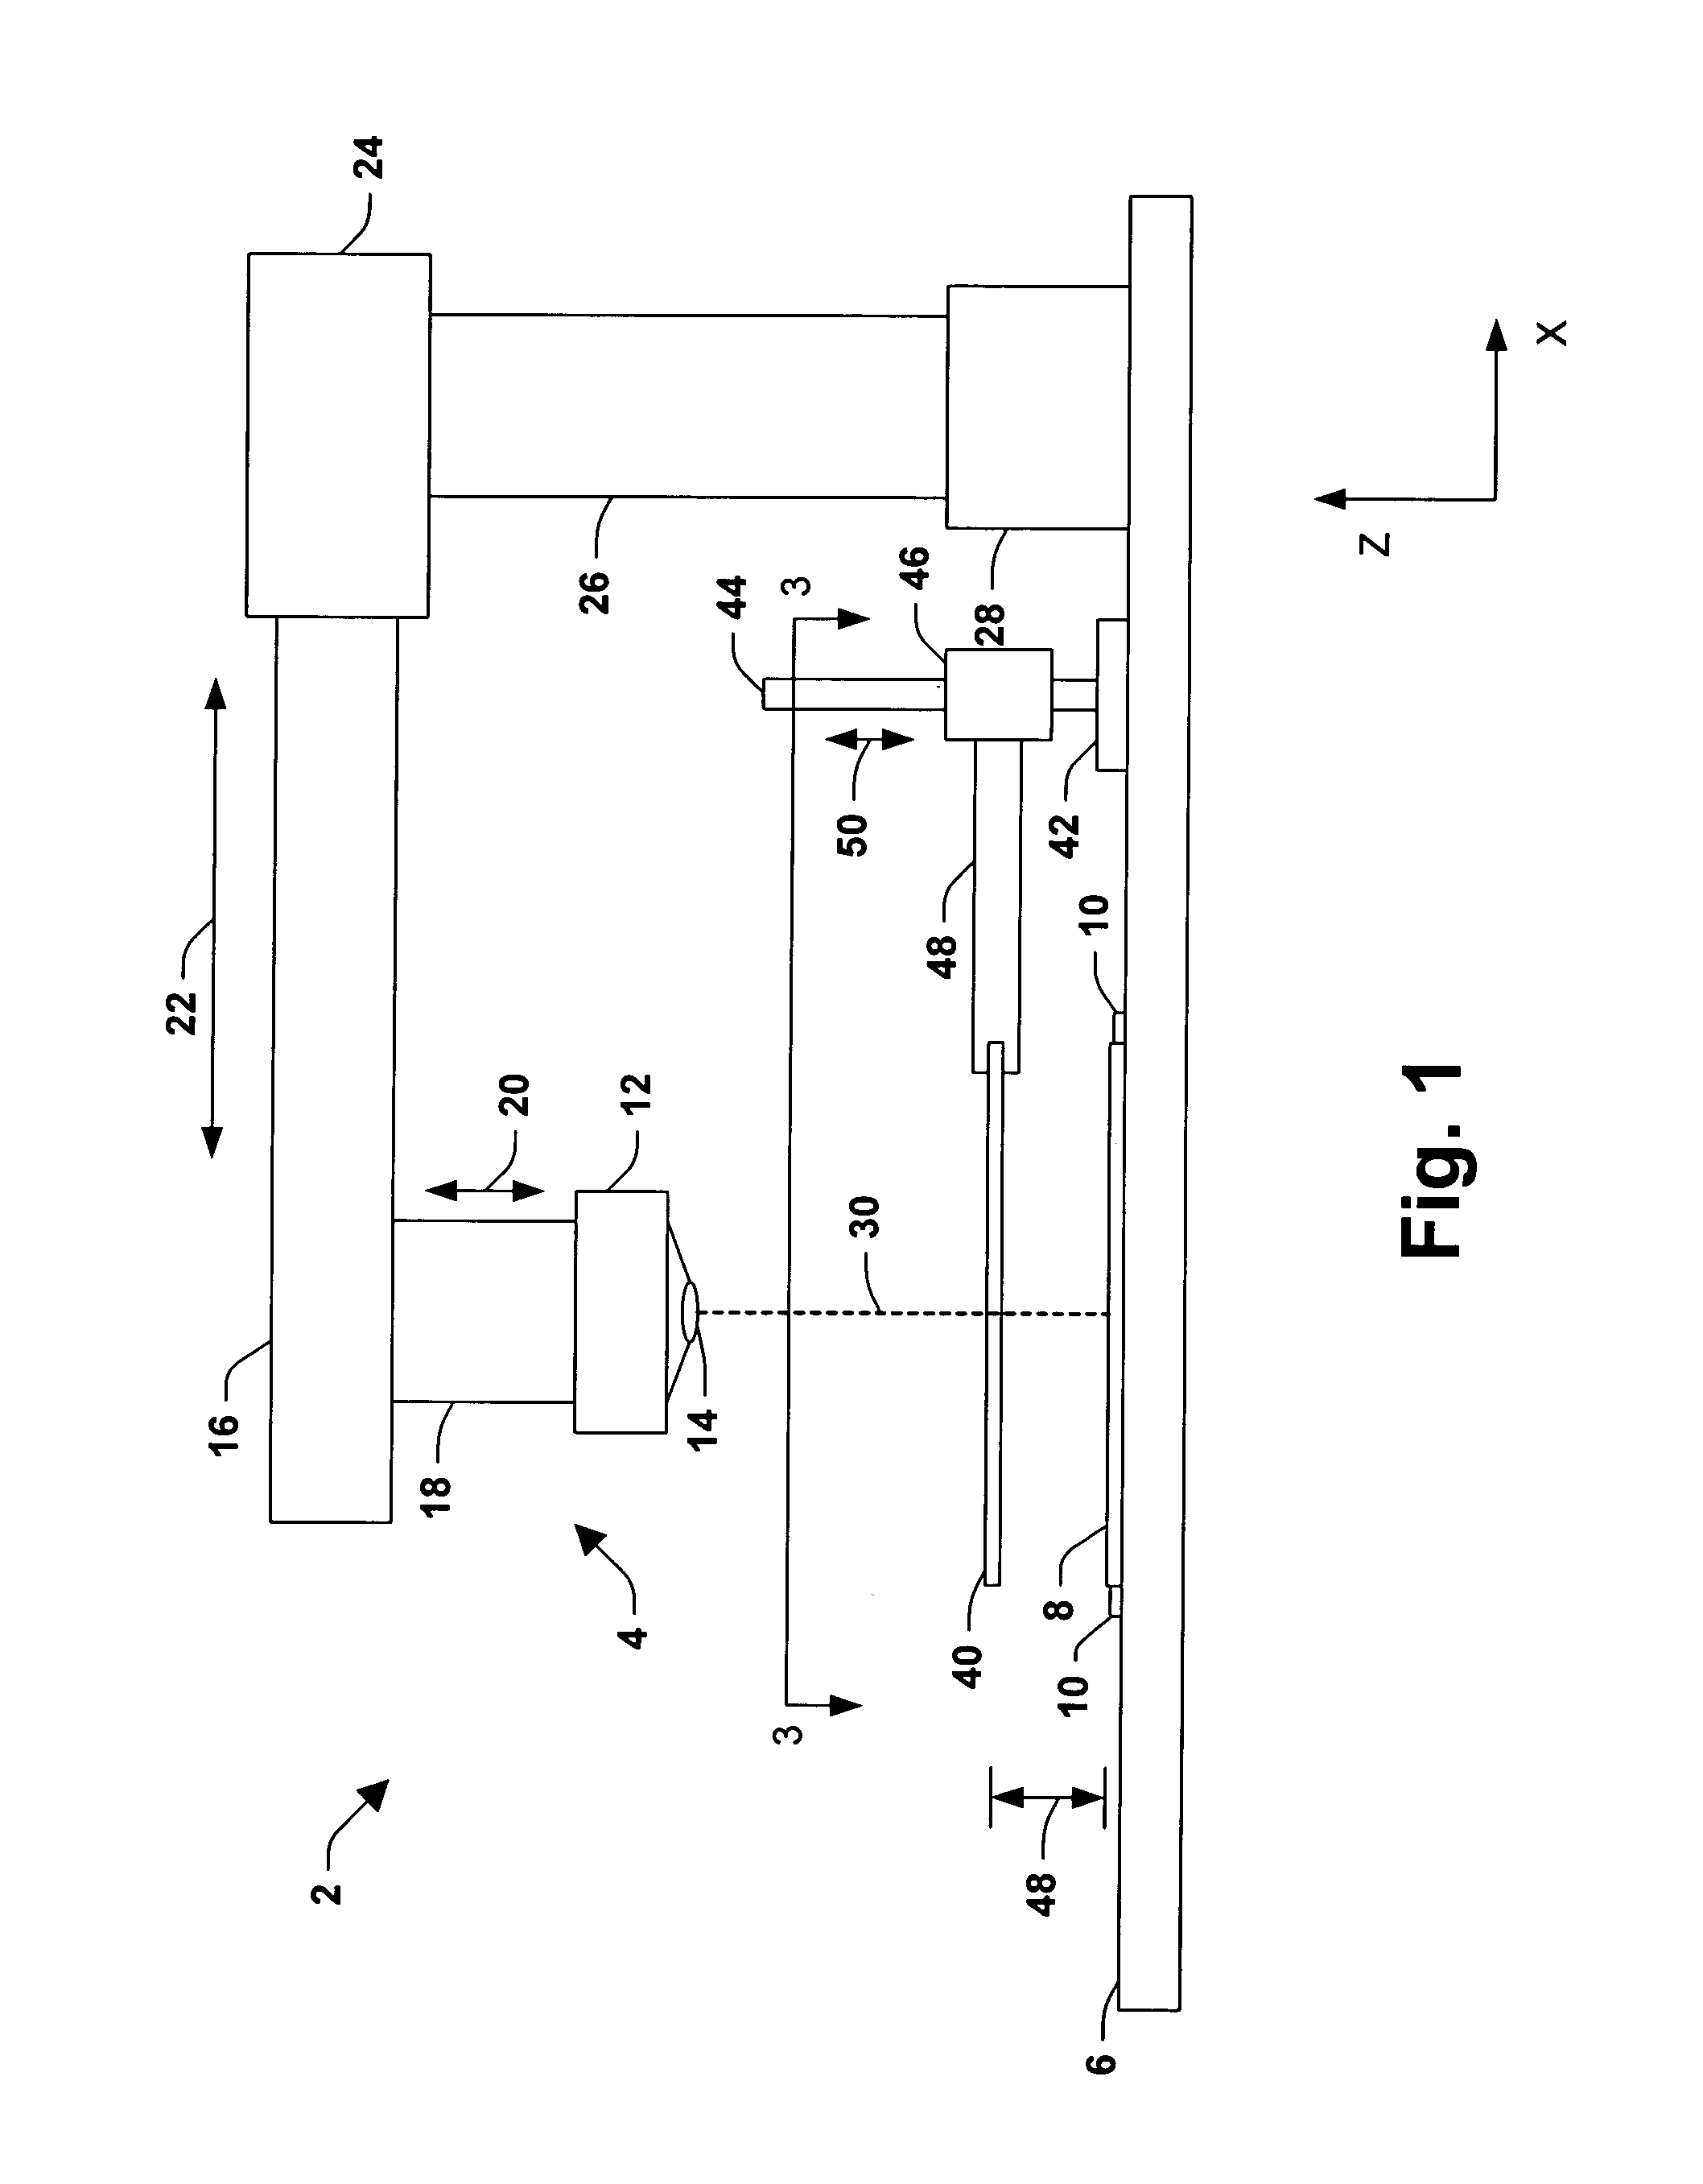 System and method for defect identification and location using an optical indicia device